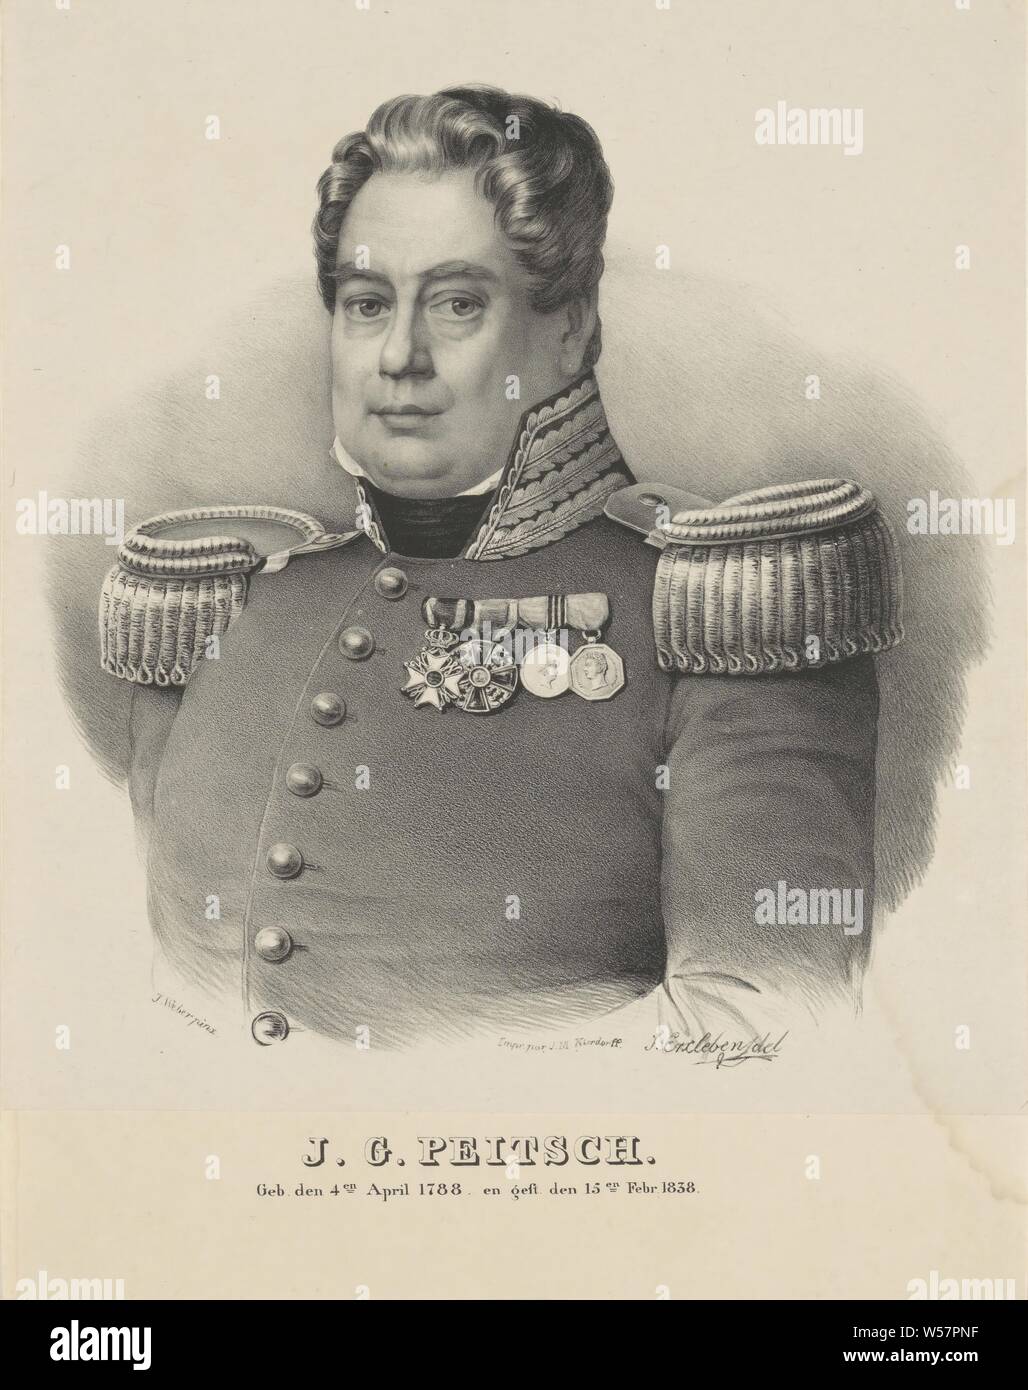 Portrait of J.G. Peitsch, The person portrayed is used to the left and wears a military uniform with epaulettes and four knight orders on his chest, historical persons ((full) bust portrait), knighthood order, James Erxleben (mentioned on object), Leiden, c. 1830 - c. 1890, paper, h 295 mm × w 233 mm Stock Photo